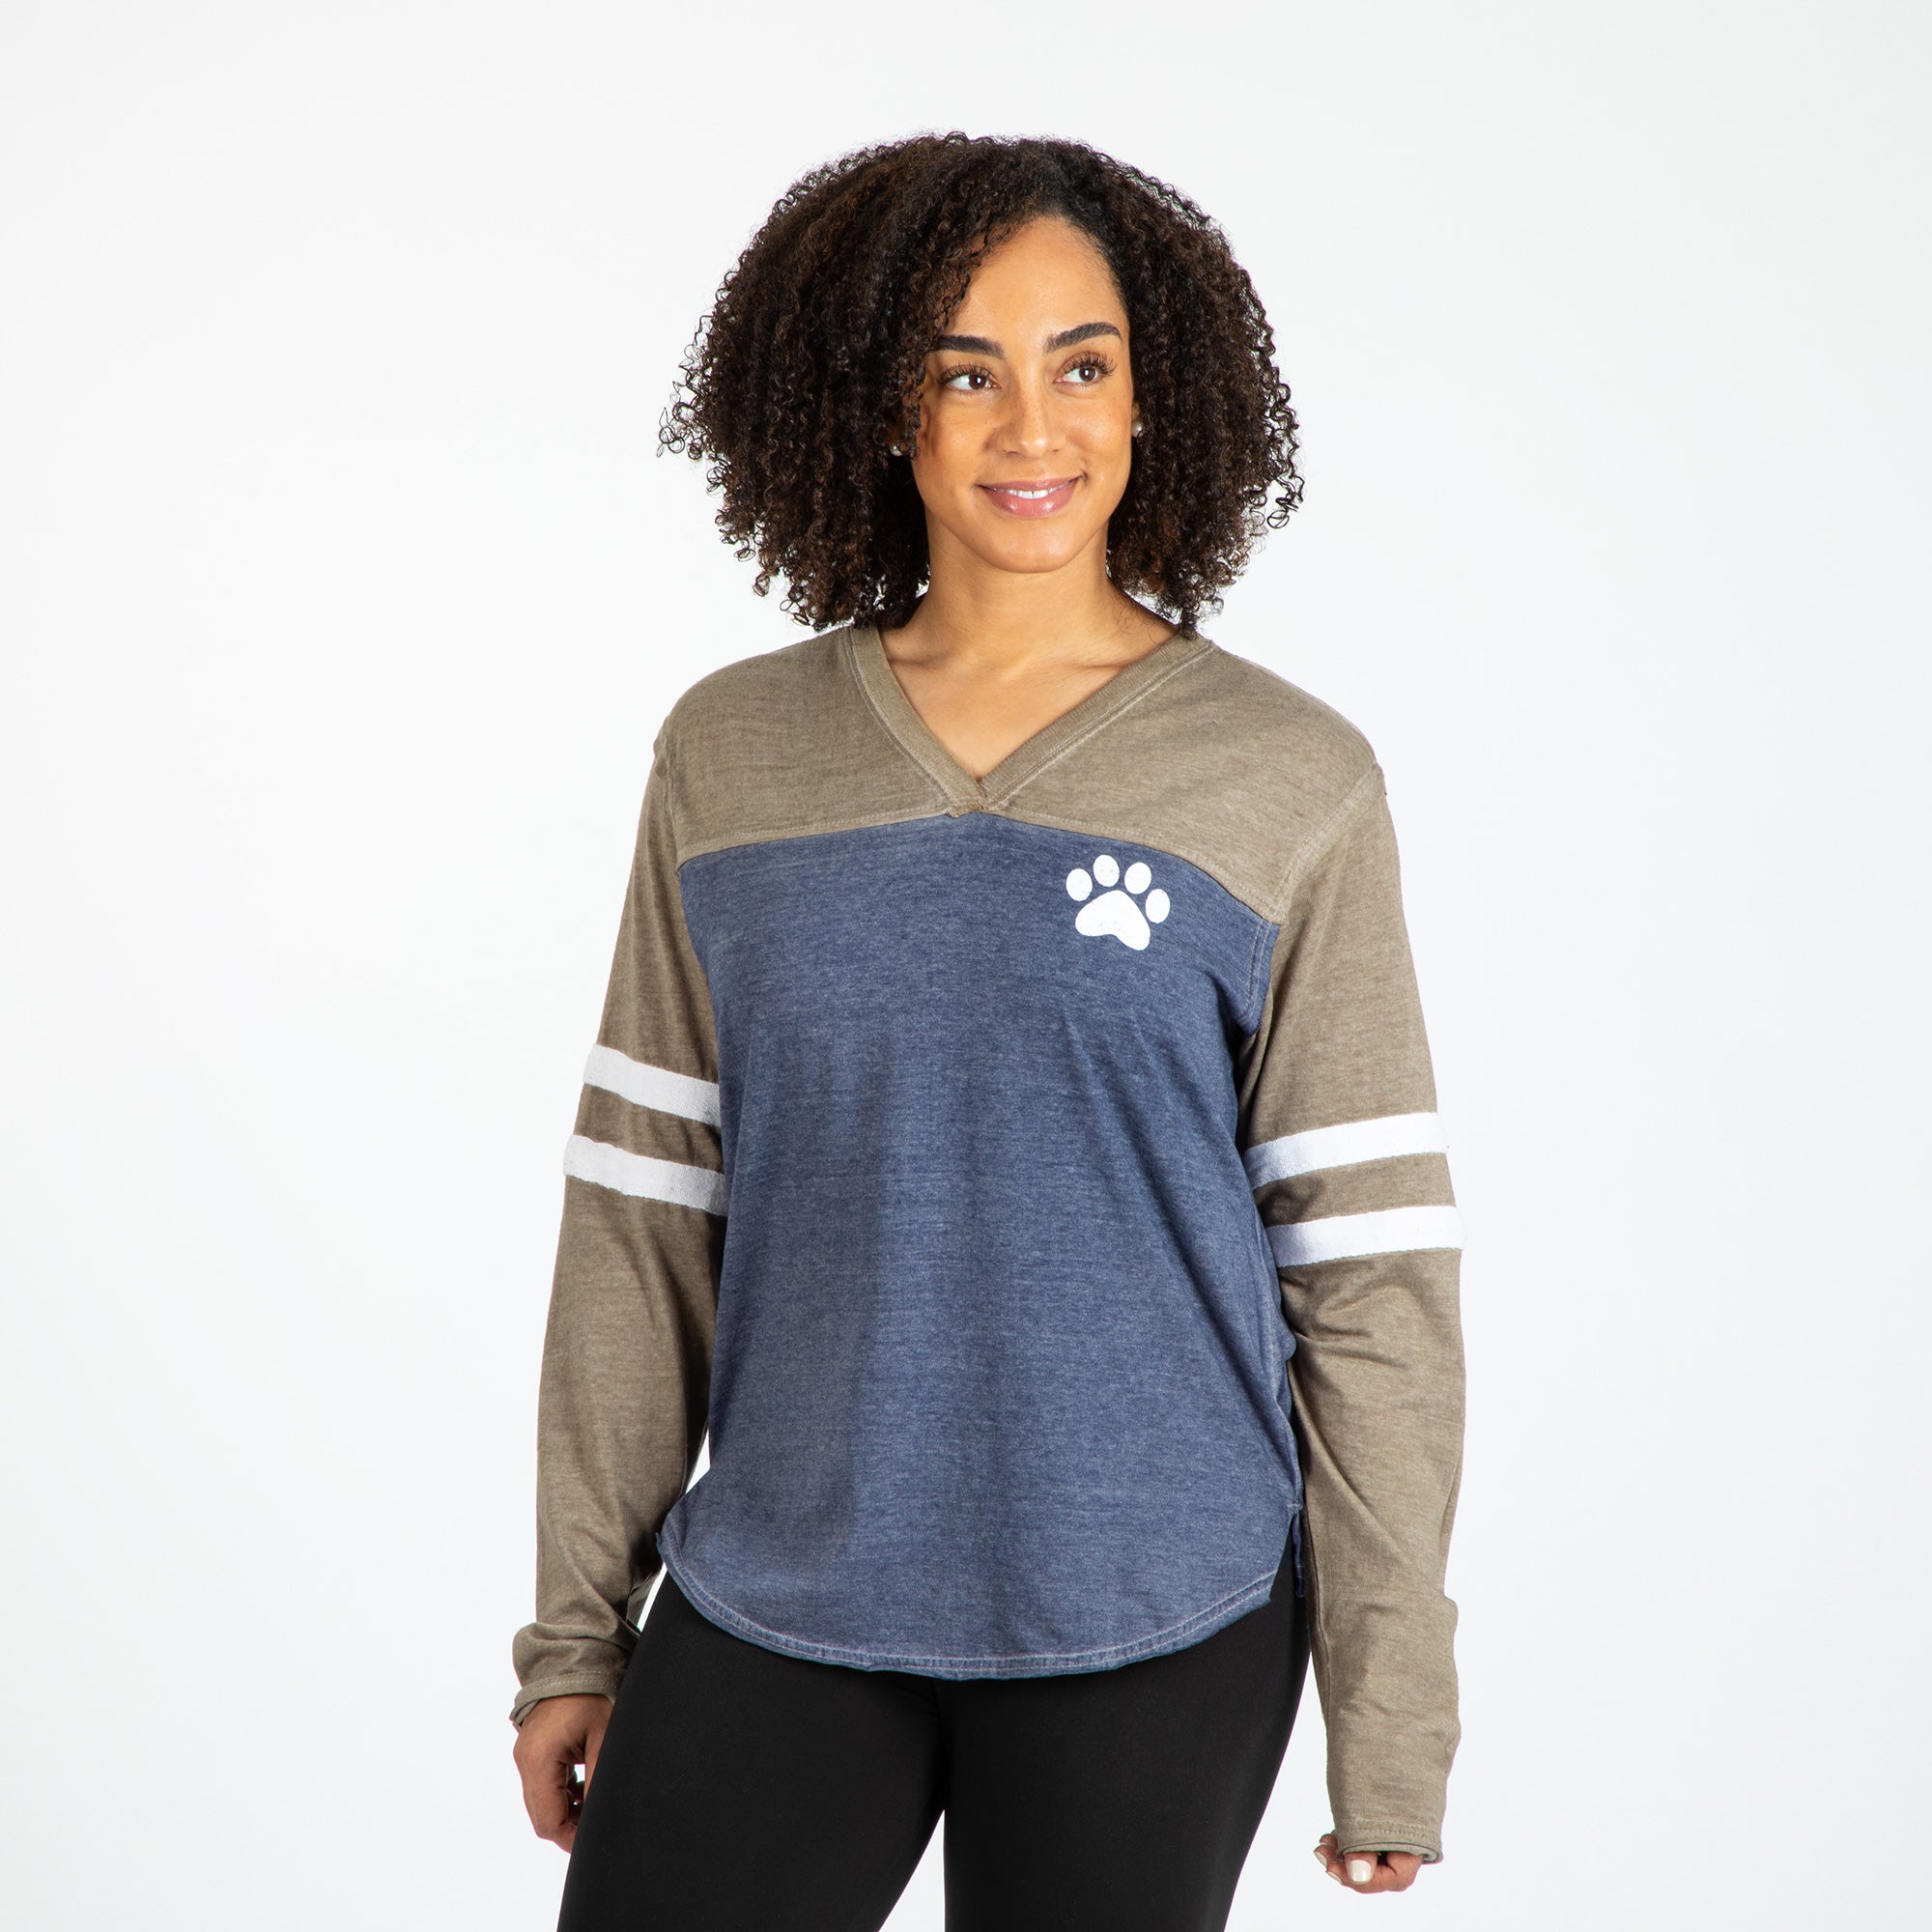 Paw Print Rugby Tee - S